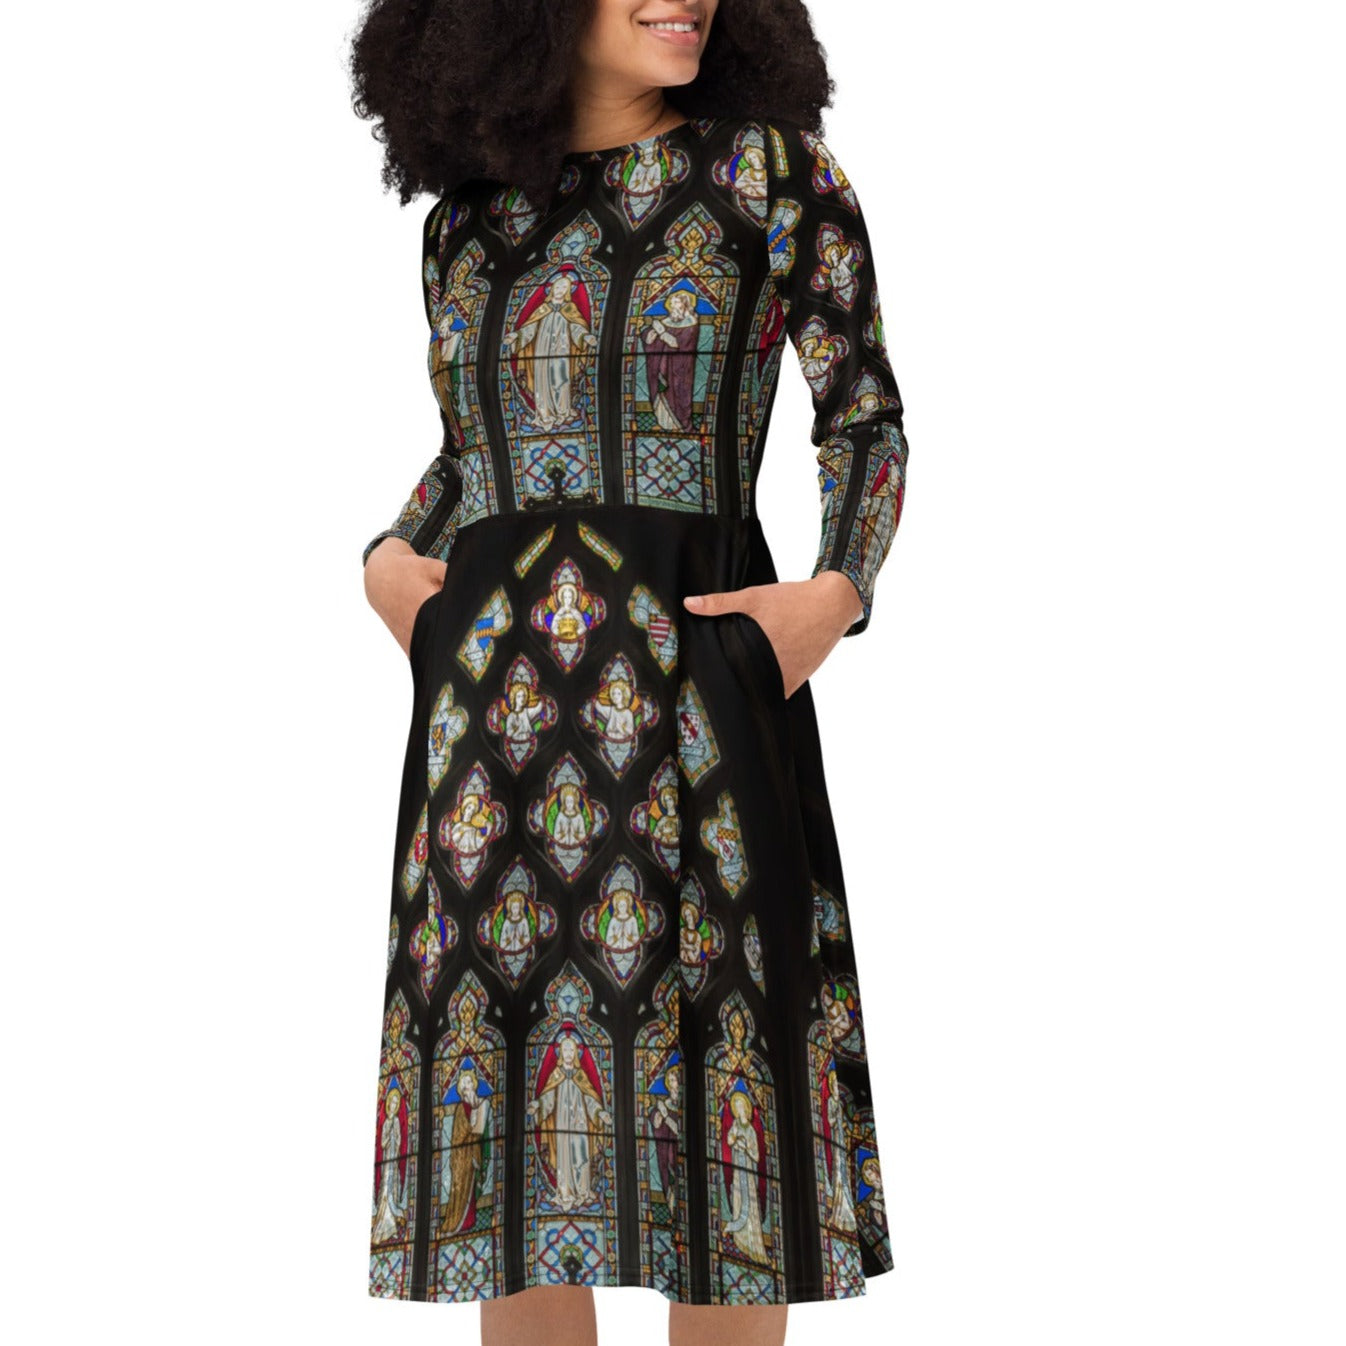 Transfiguration Stained Glass Dress (with Pockets)